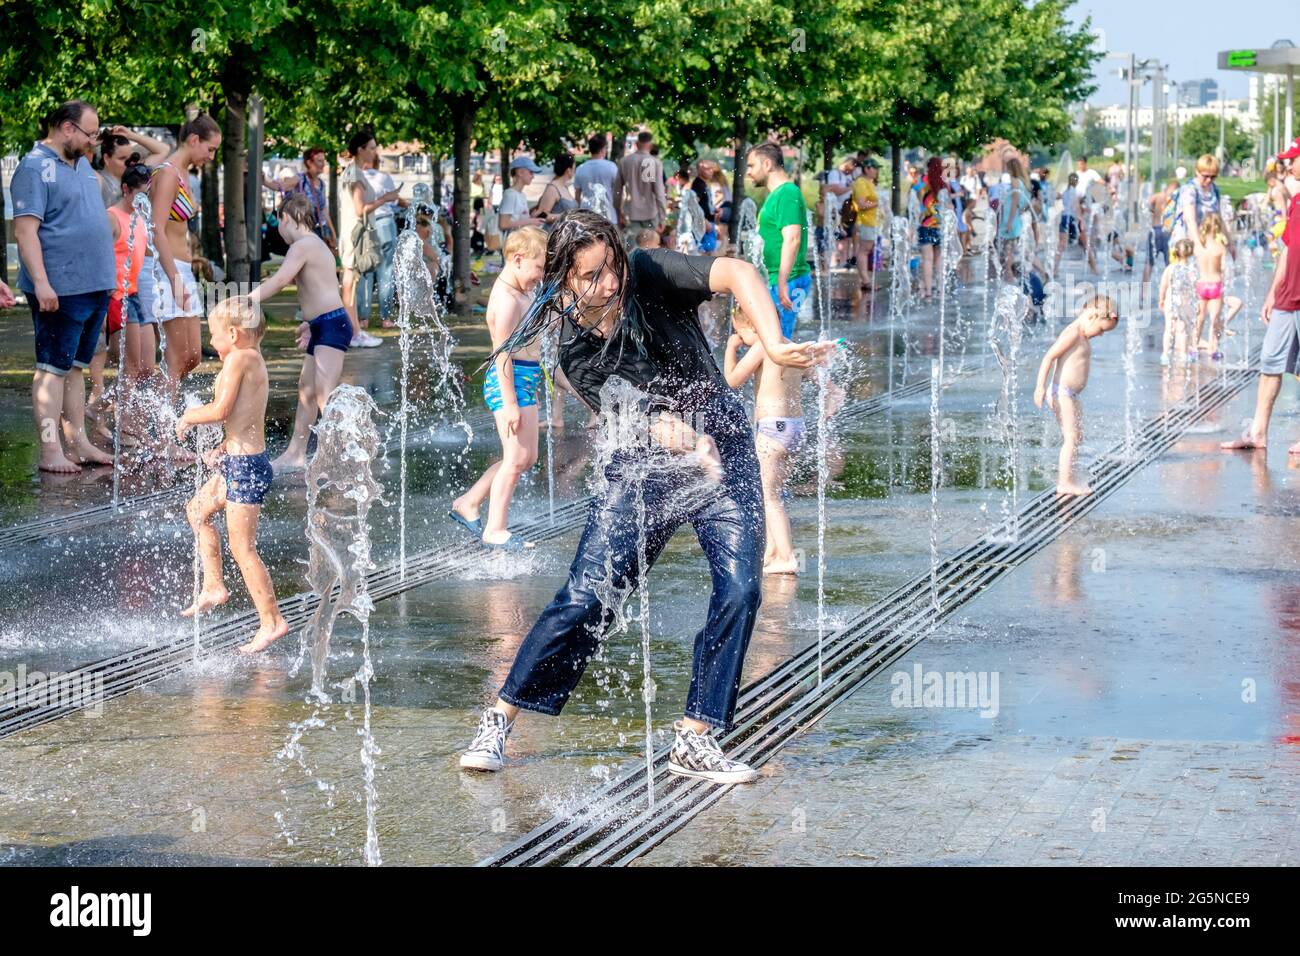 Moscow, Russia, June 26, 2021. Women, men and children bathe in the jets of the fountain in the Muzeon Park. Water entertainment for the townspeople Stock Photo